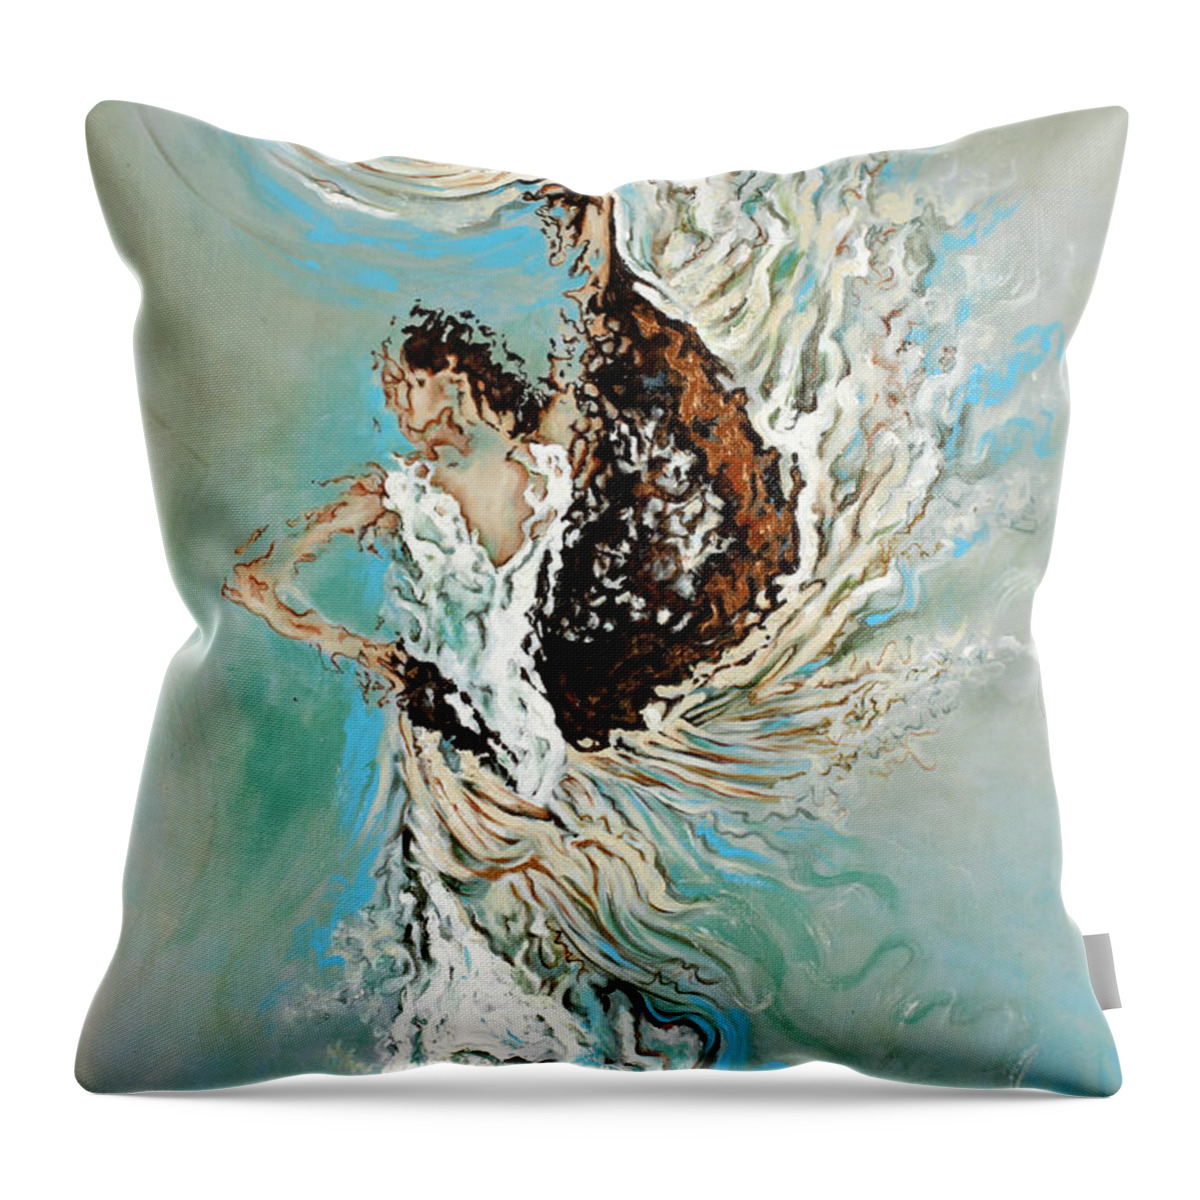 Flamenco Throw Pillow featuring the painting Air by Karina Llergo